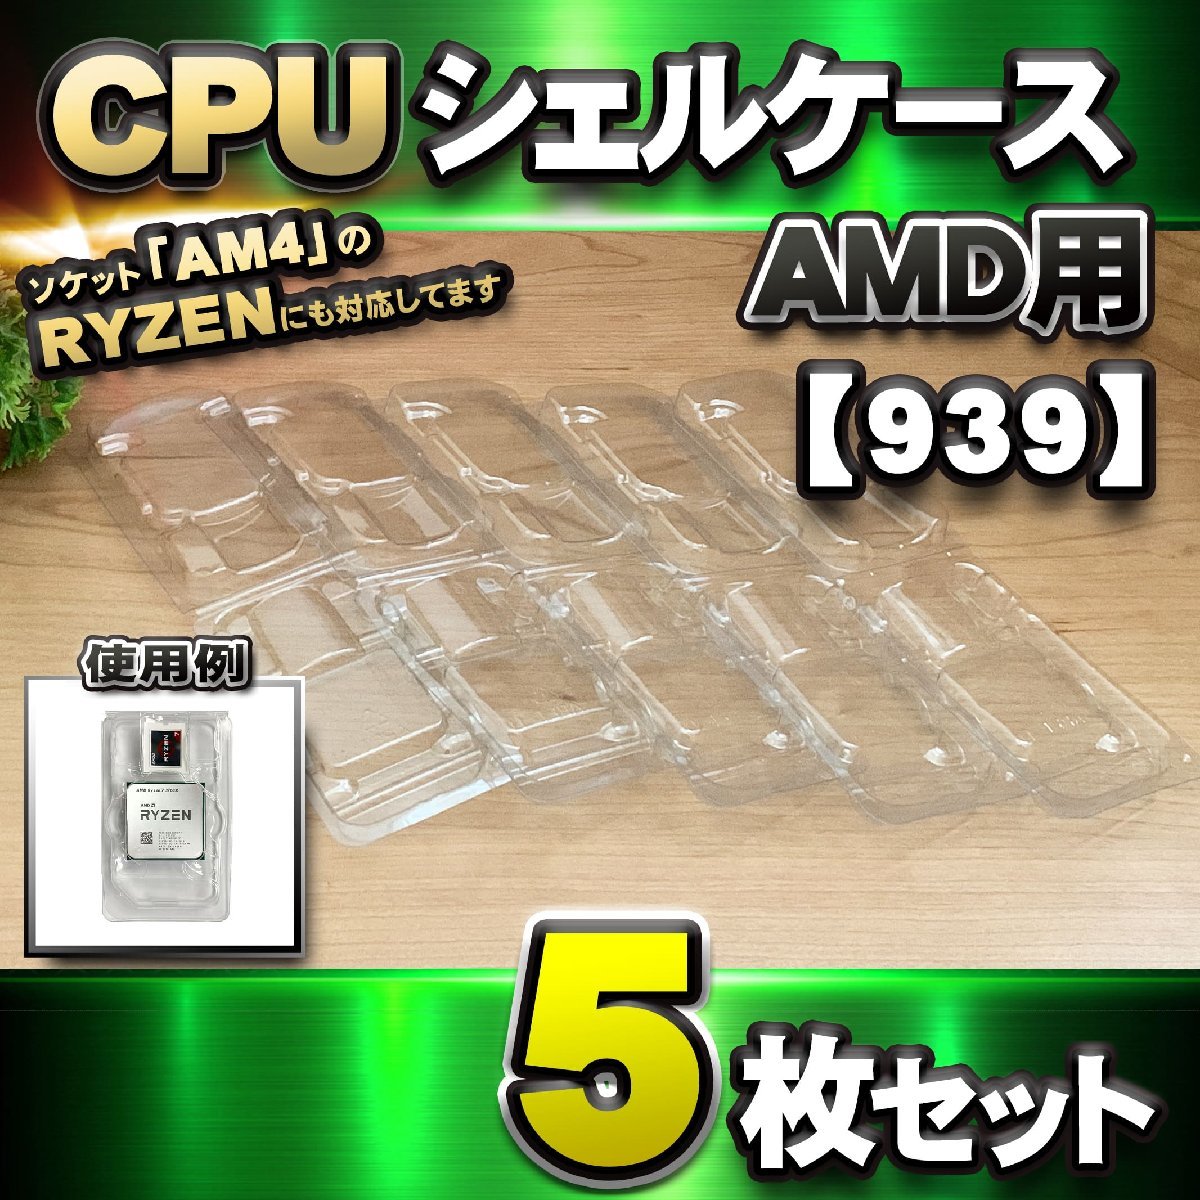 [ APU correspondence ]CPU shell case AMD for plastic [AM4. RYZEN also correspondence ] storage storage case 5 pieces set 